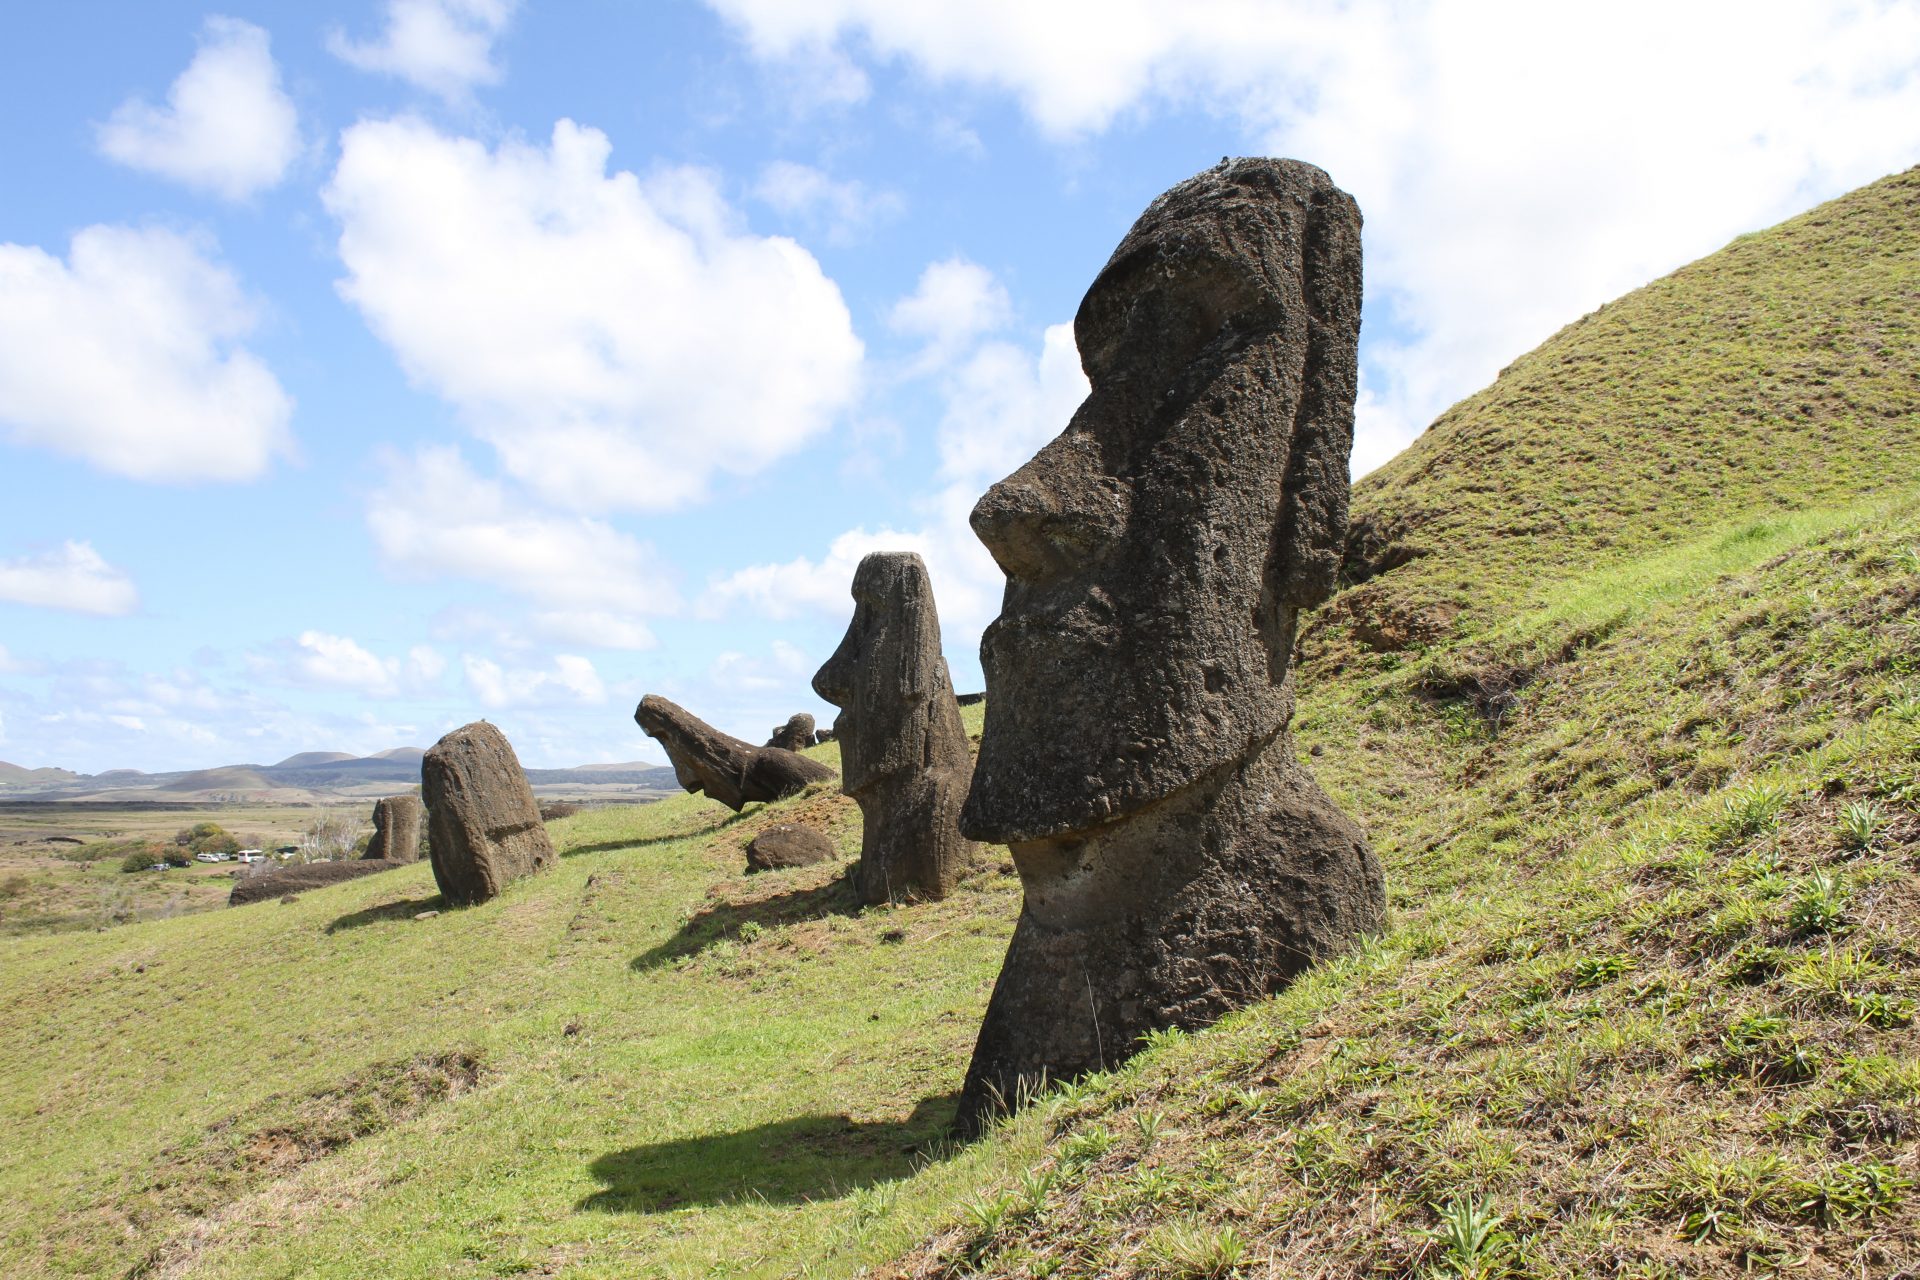 3. Easter Island (Chile)